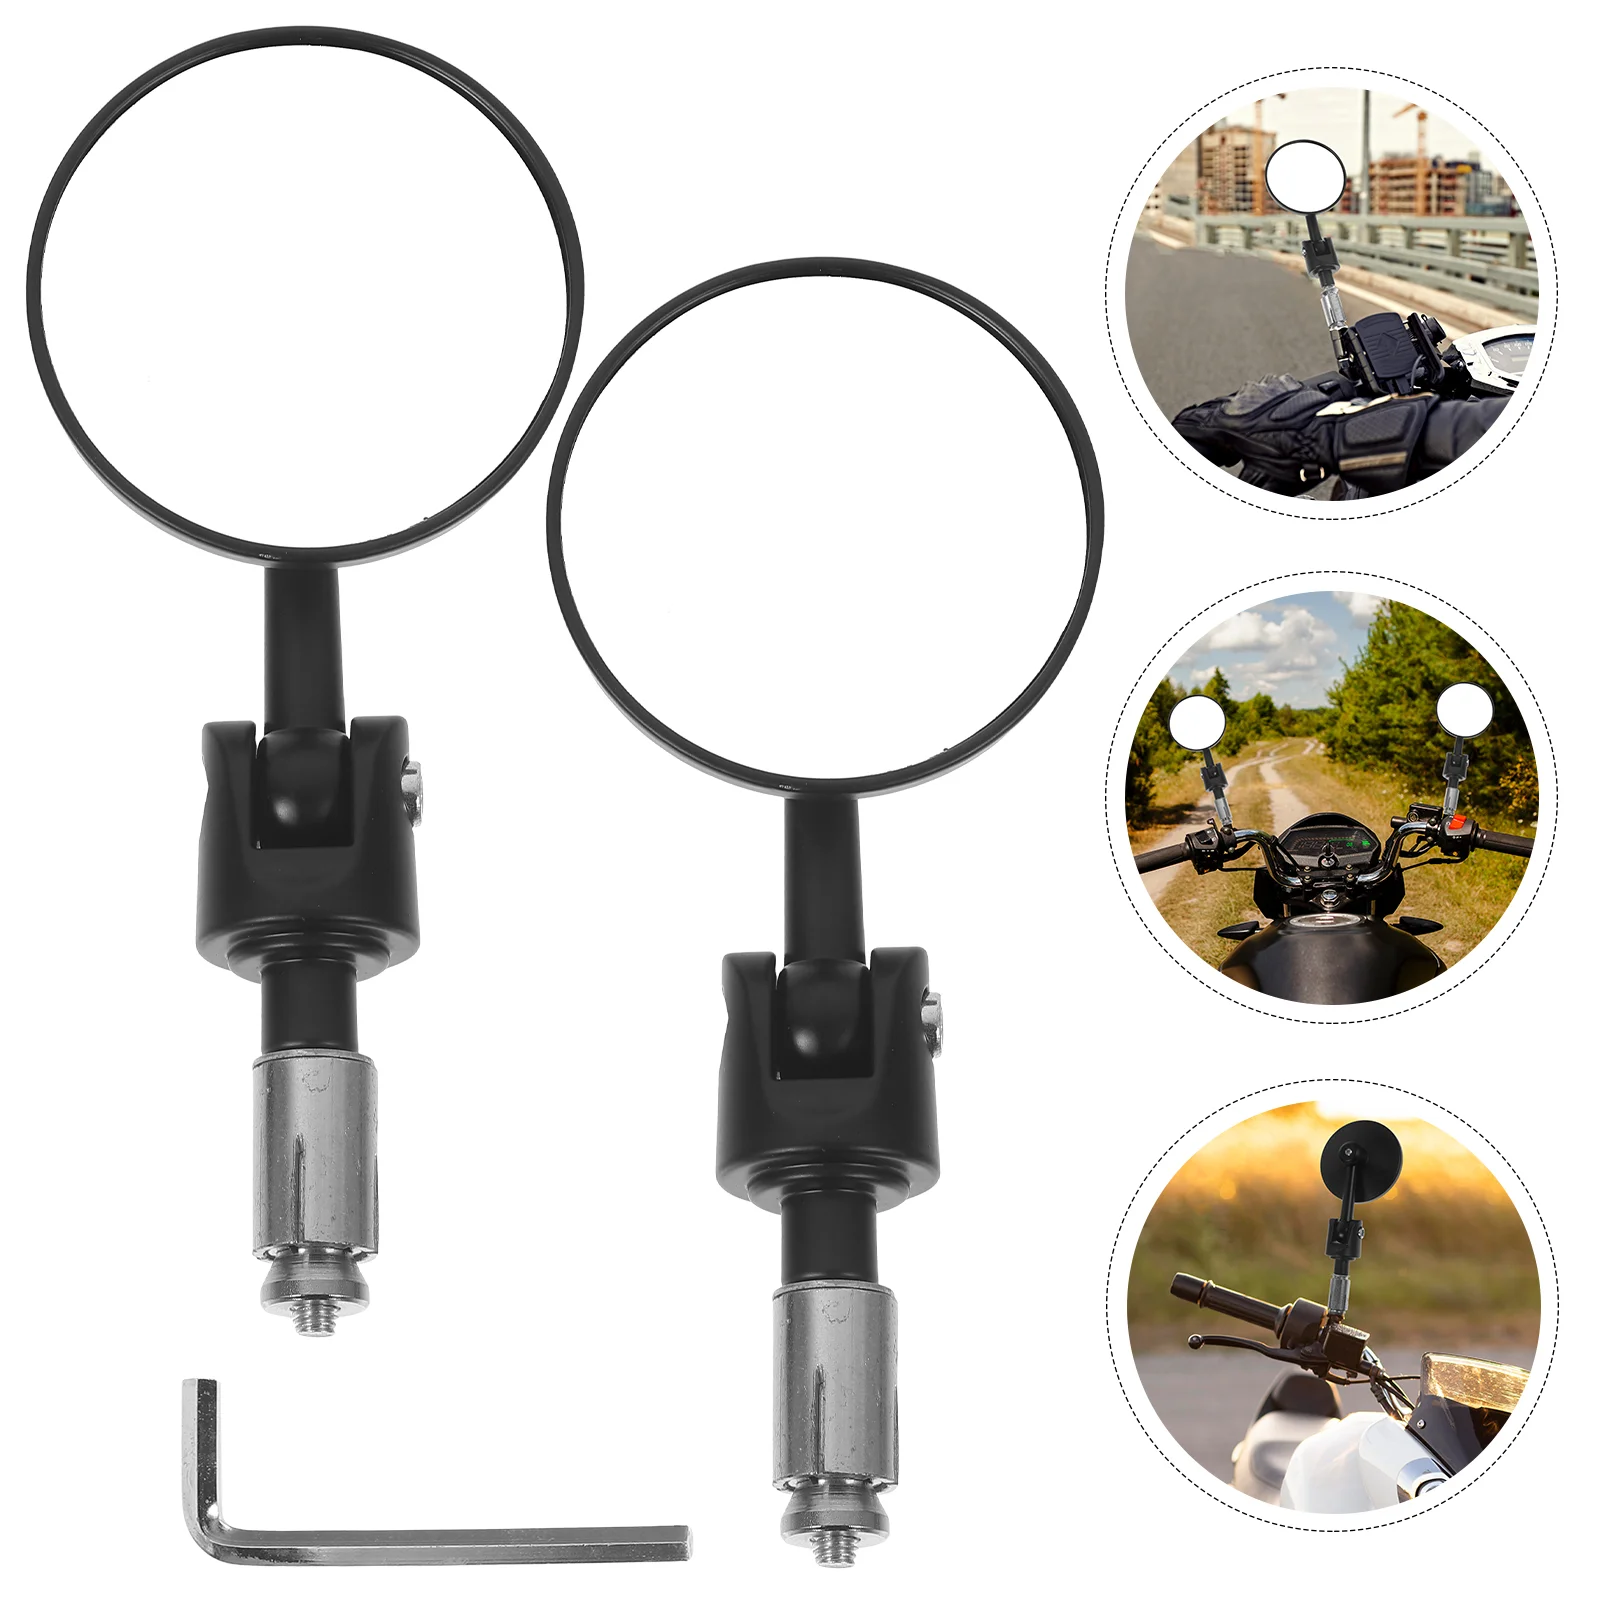 

2 Pcs Bicycle Mirrors For Handlebars Motorcycle Mirrors Bike Side Mirror Rearview Mirrors